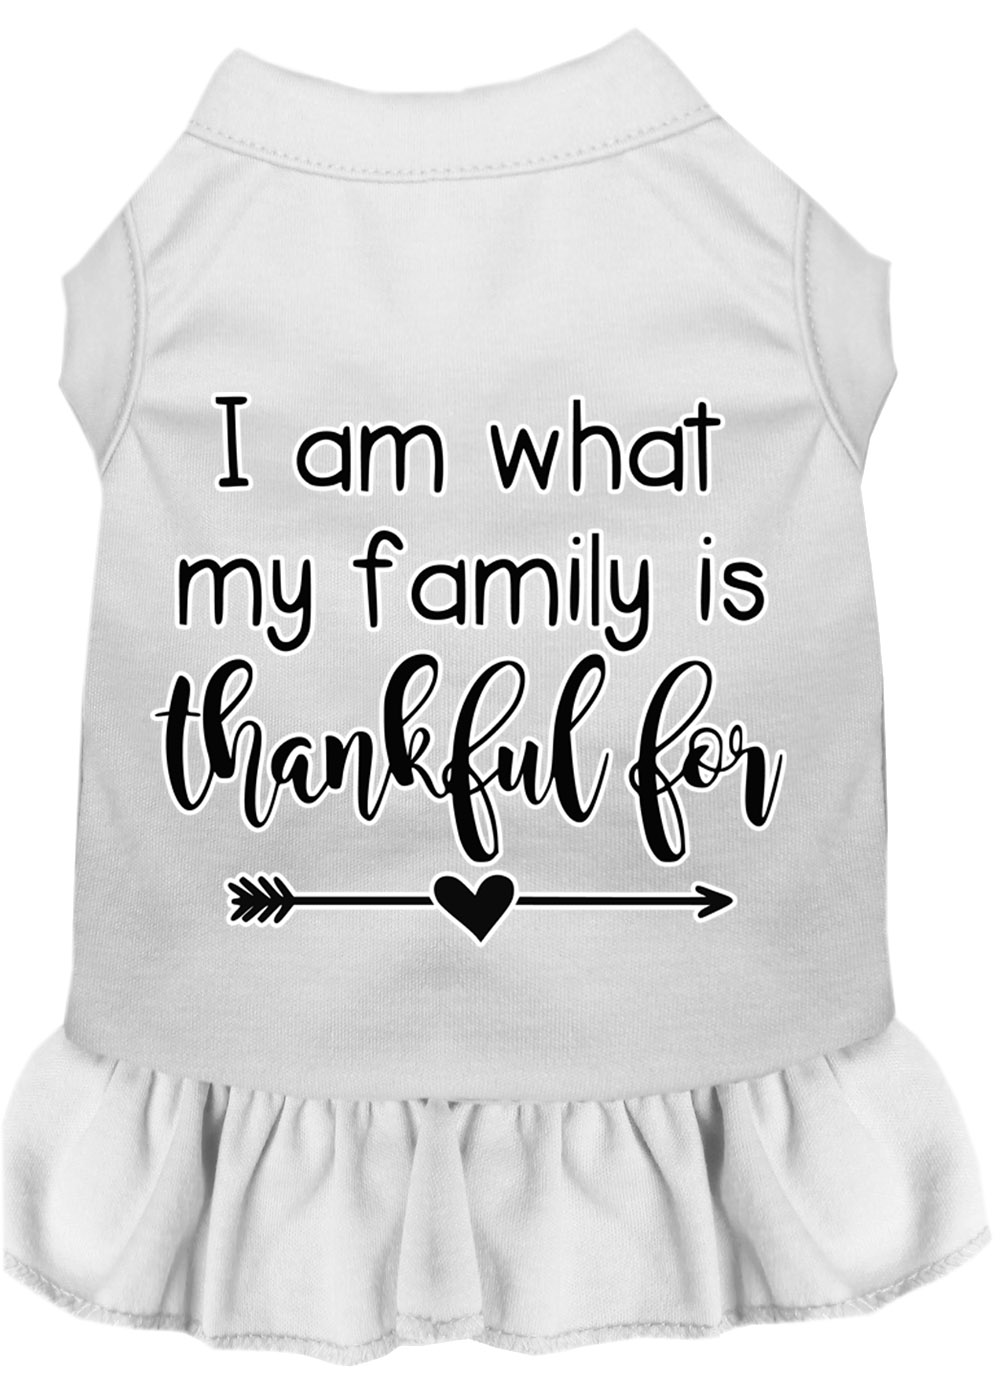 I Am What My Family is Thankful For Screen Print Dog Dress White XS